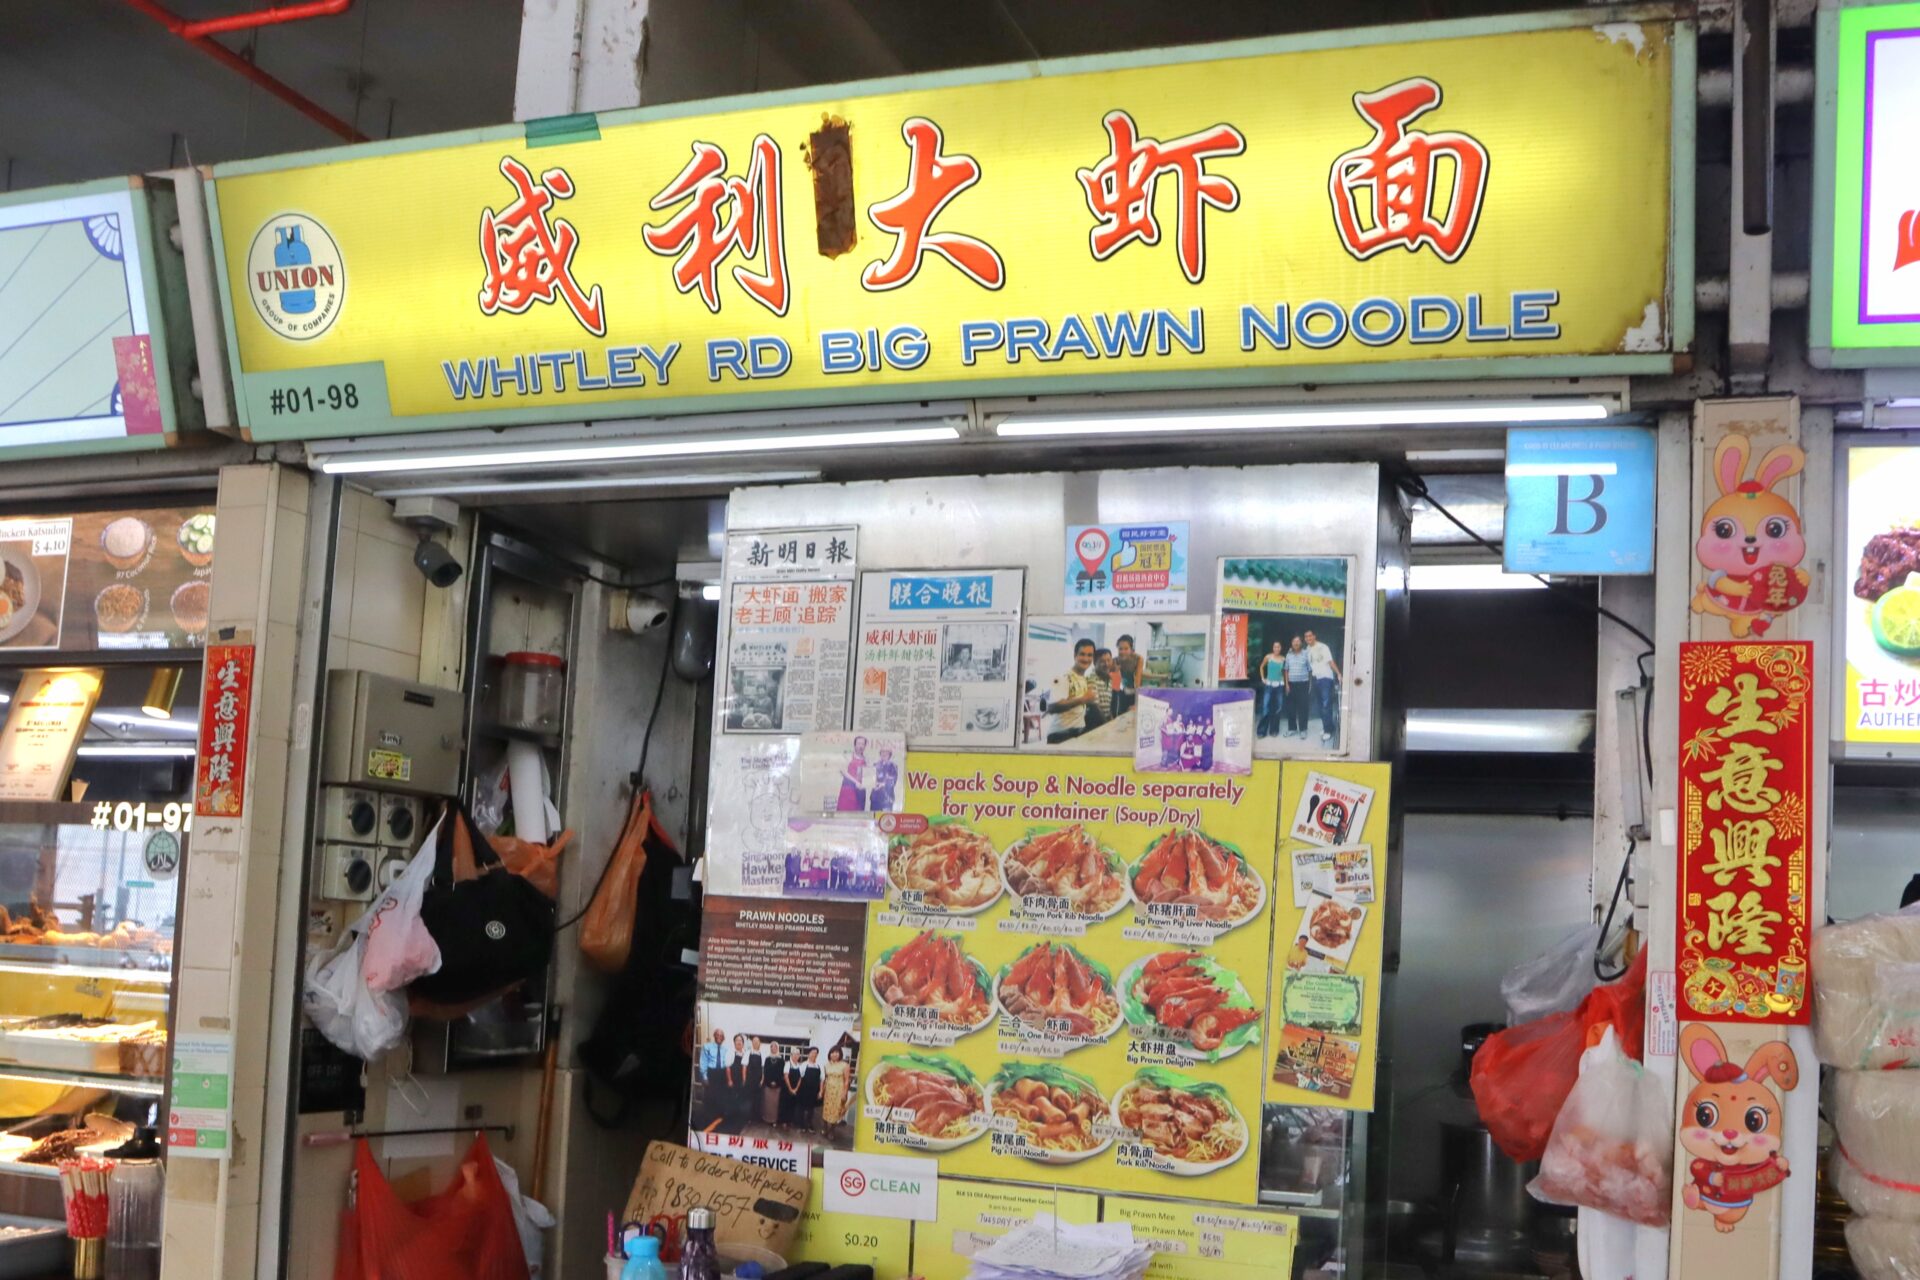 Old Airport Road Food Centre - whitley rd prawn noodle